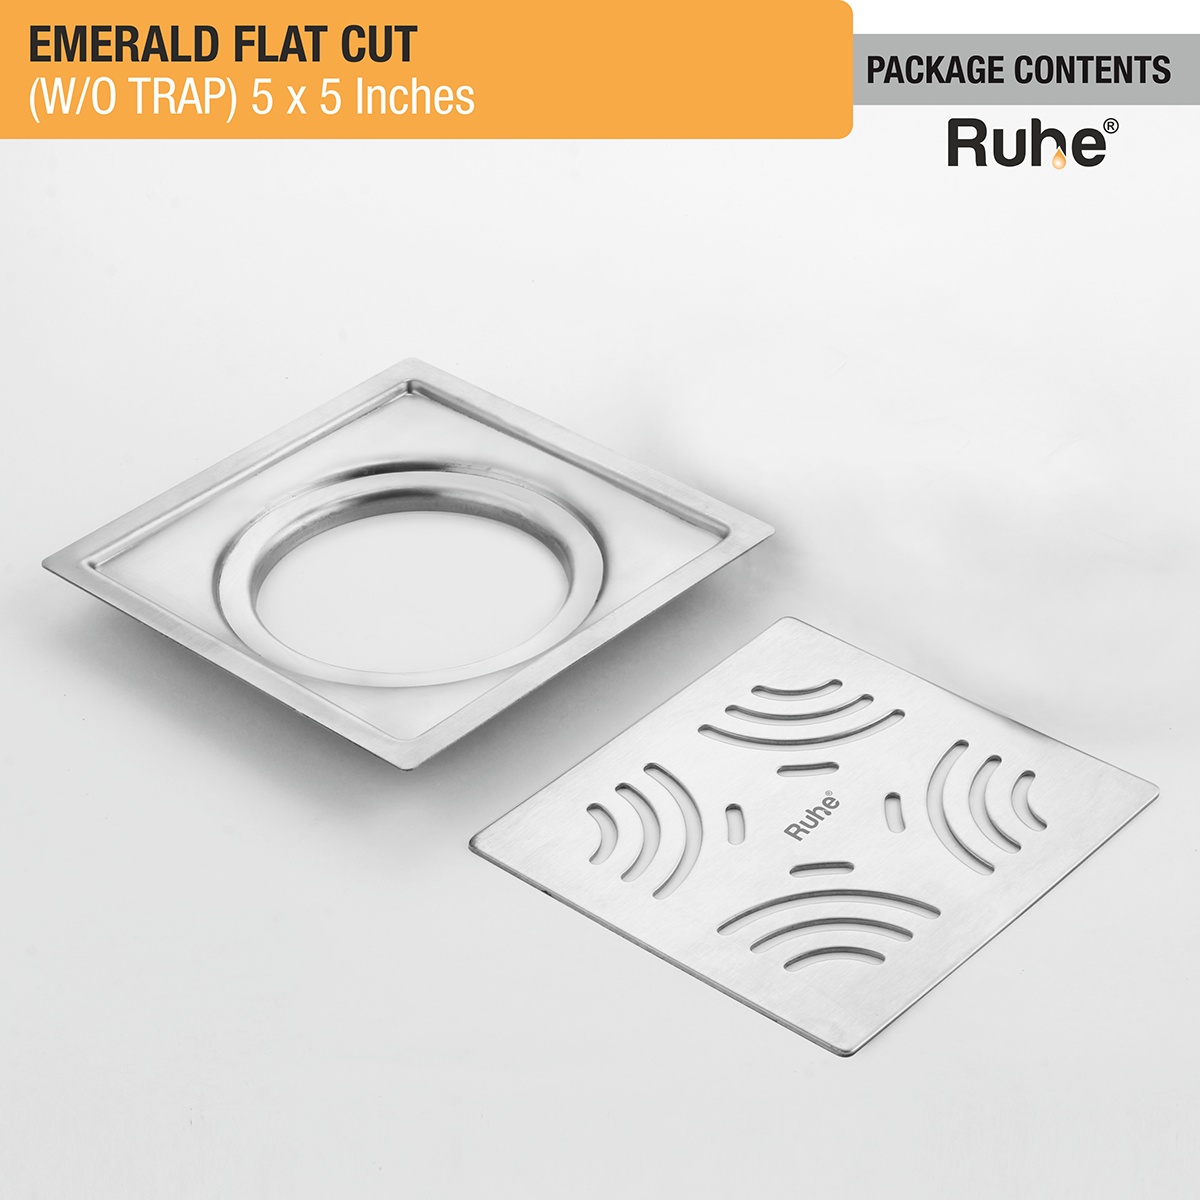 Emerald Square Flat Cut 304-Grade Floor Drain (5 x 5 Inches) package